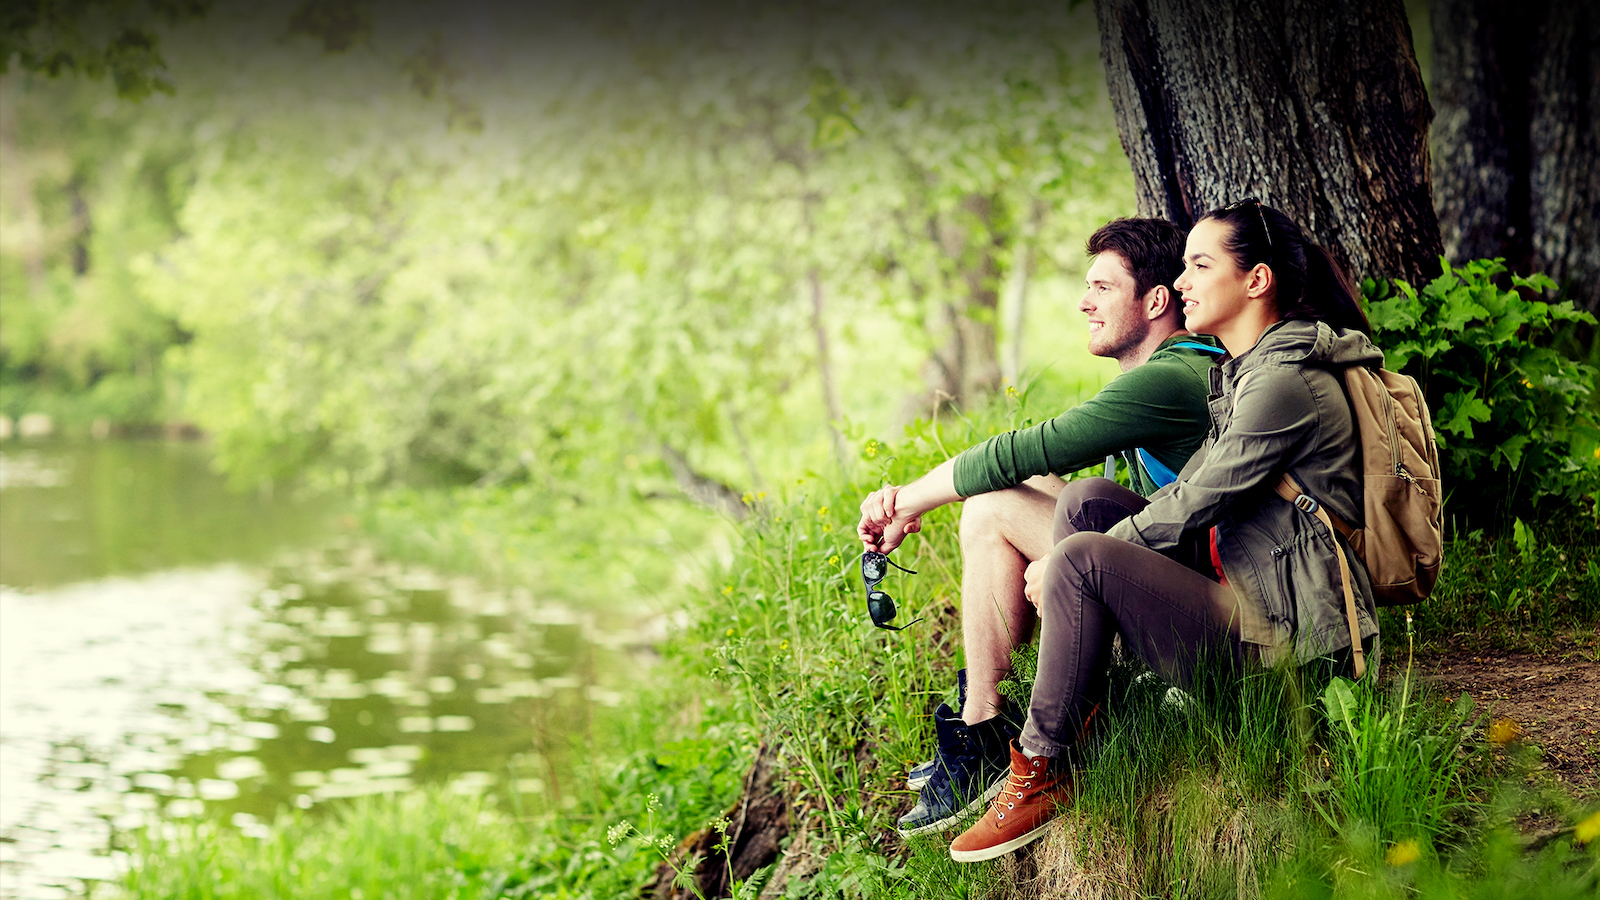 Couple gazing at nature together